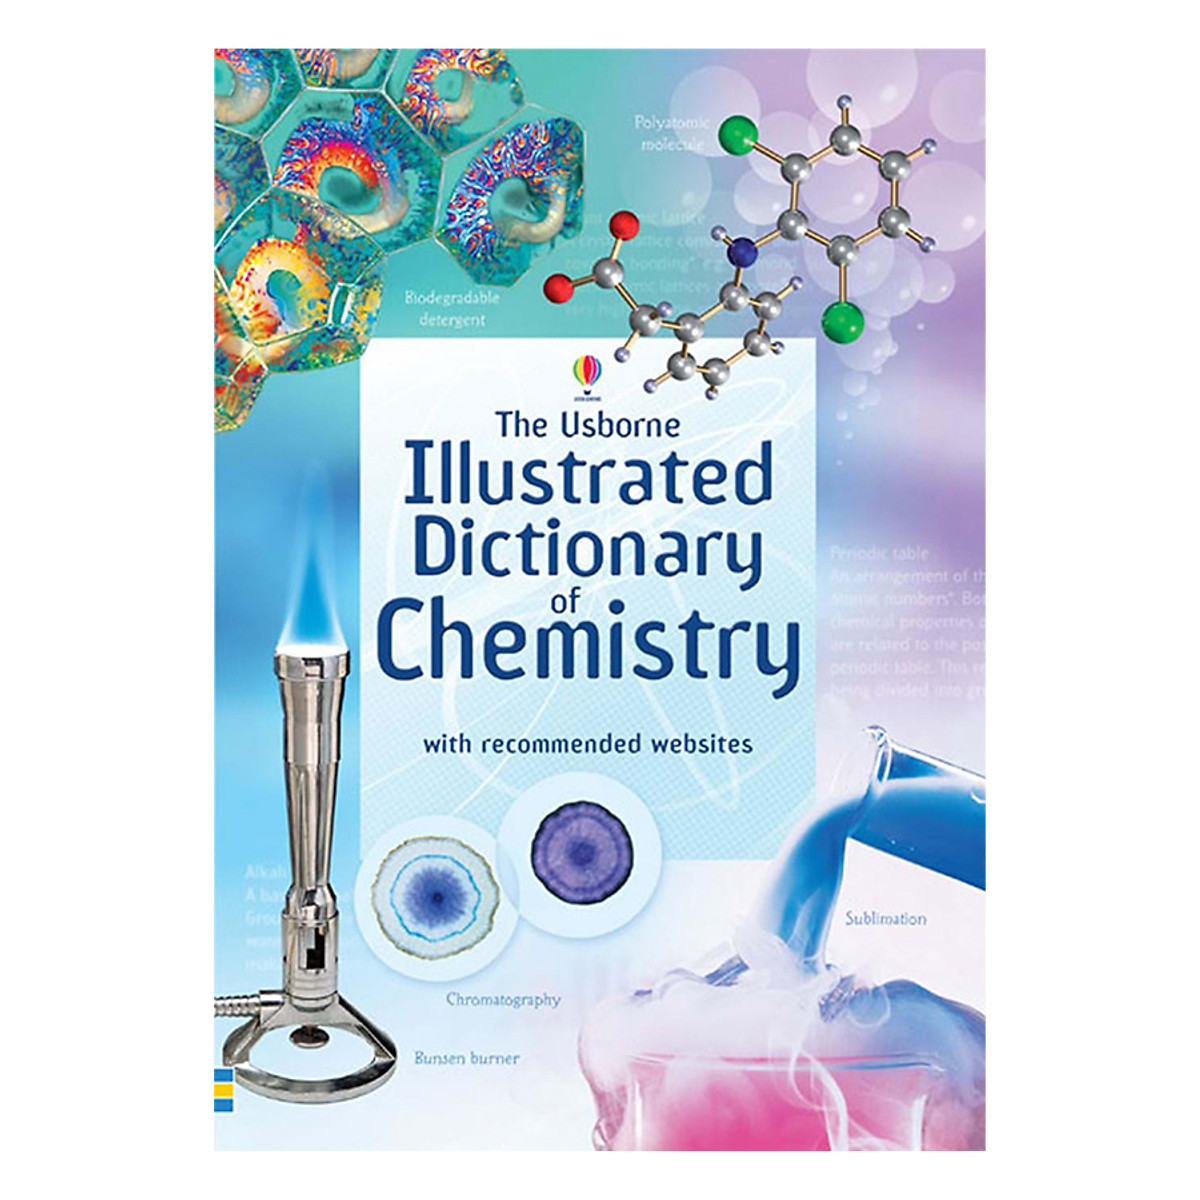 Sách tiếng Anh - Usborne Illustrated Dictionary of Chemistry